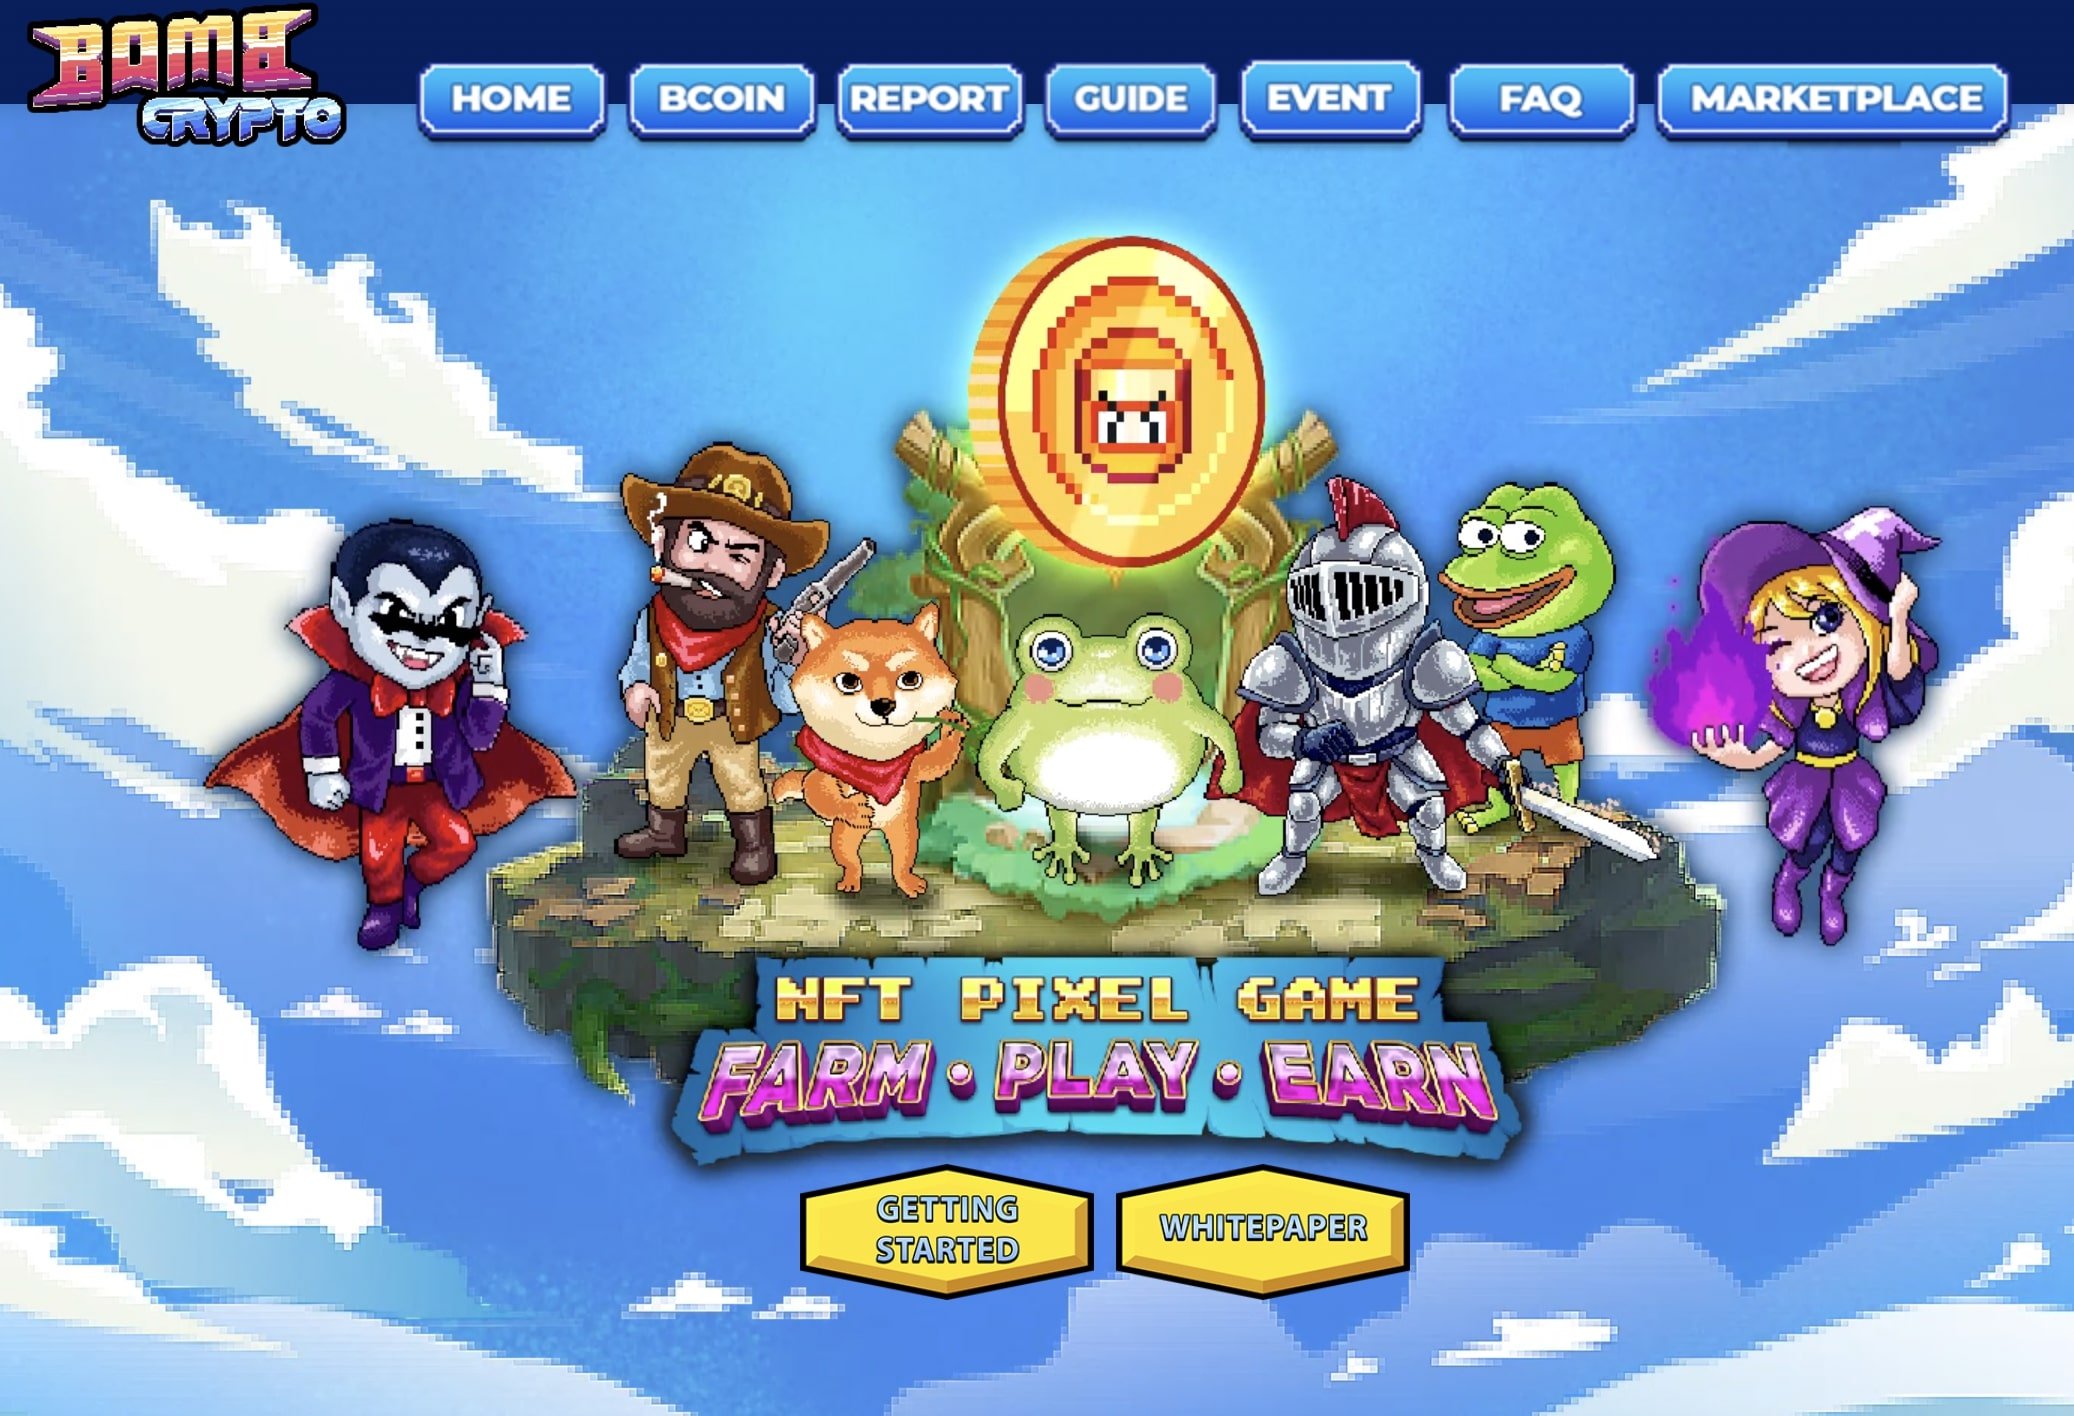 Homepage of Bomb Crypto NFT game featuring various characters